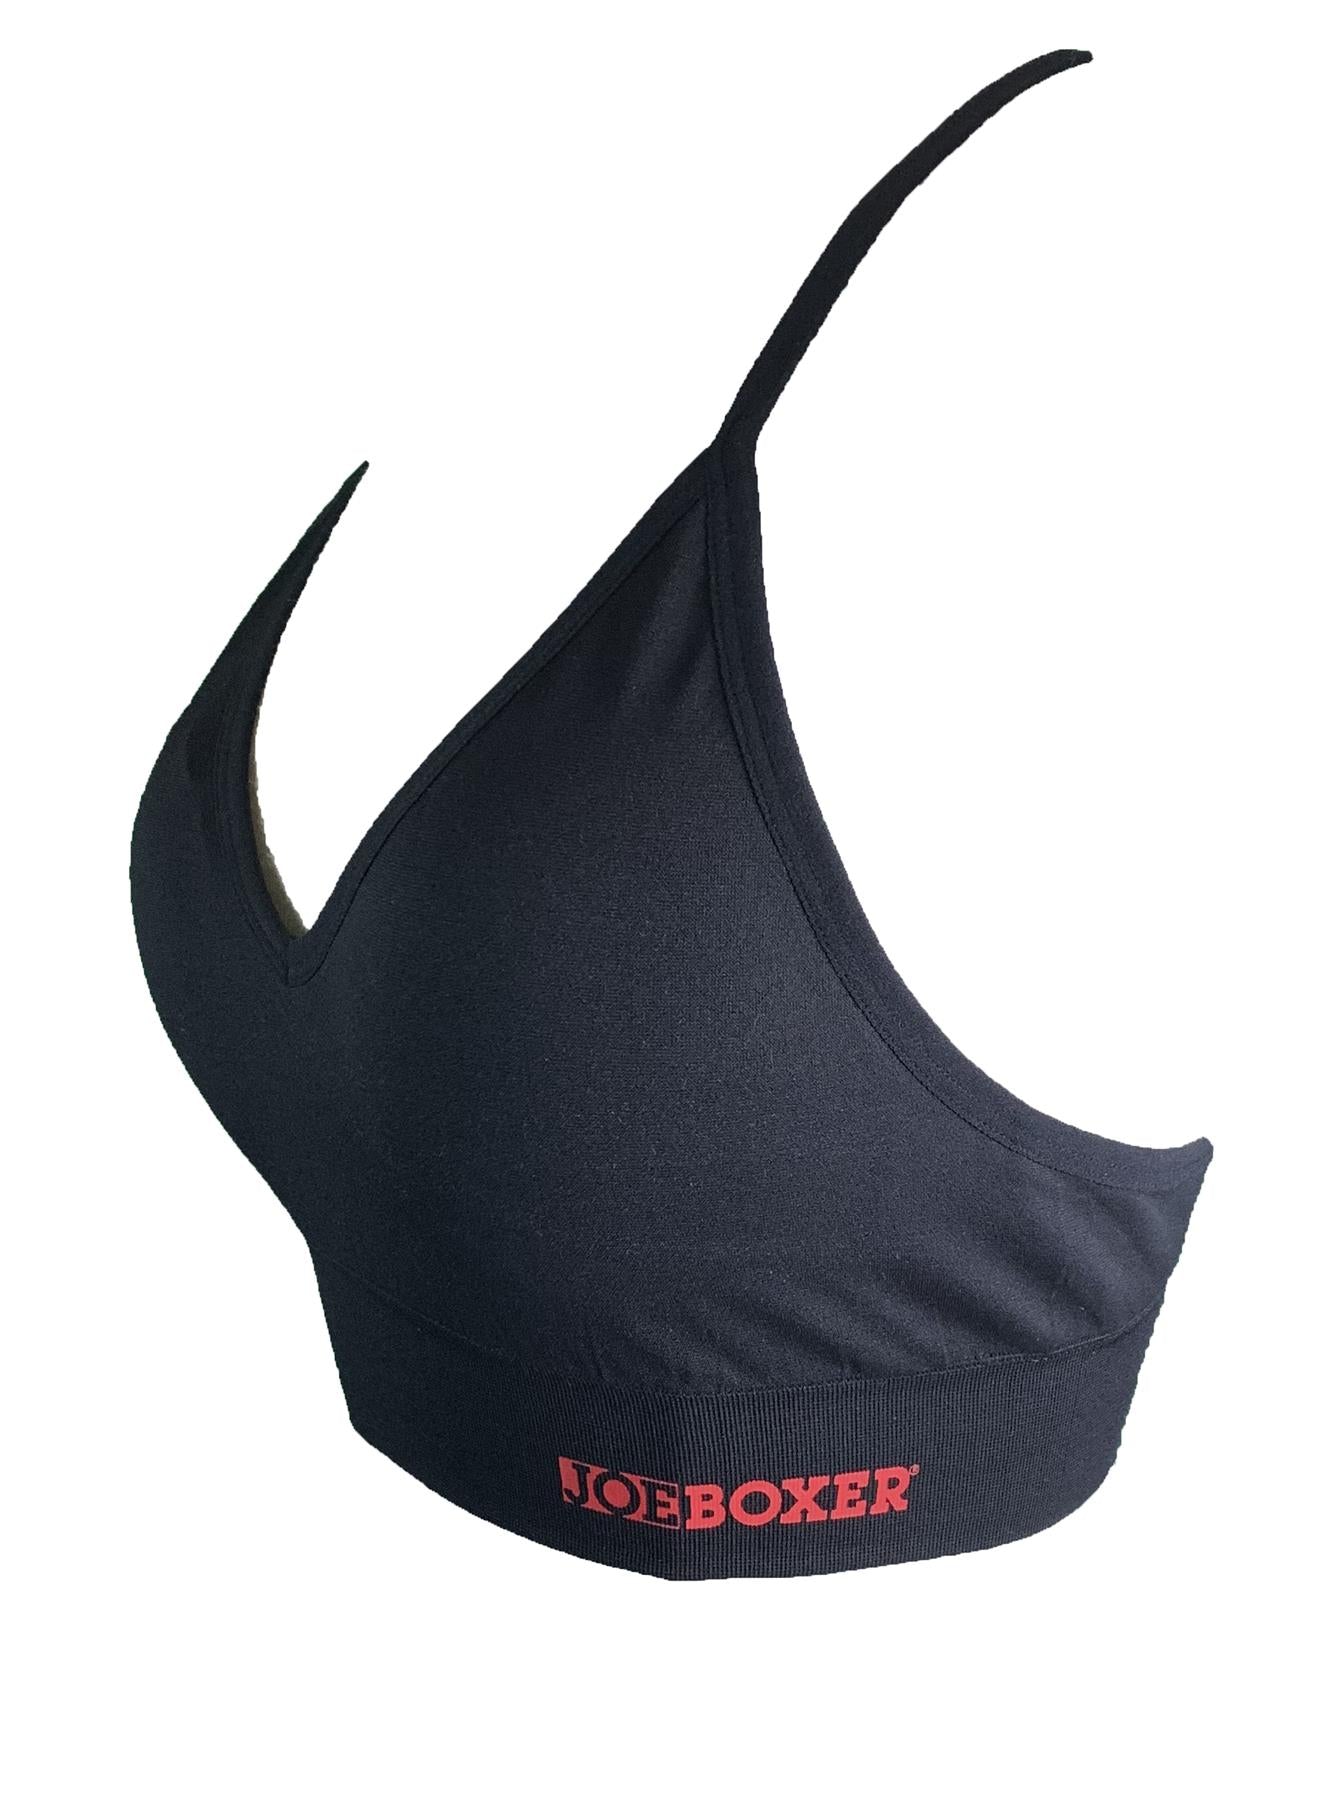 Joe Boxer Moulded Cup  Seamless Sports Running Gym Yoga Bra